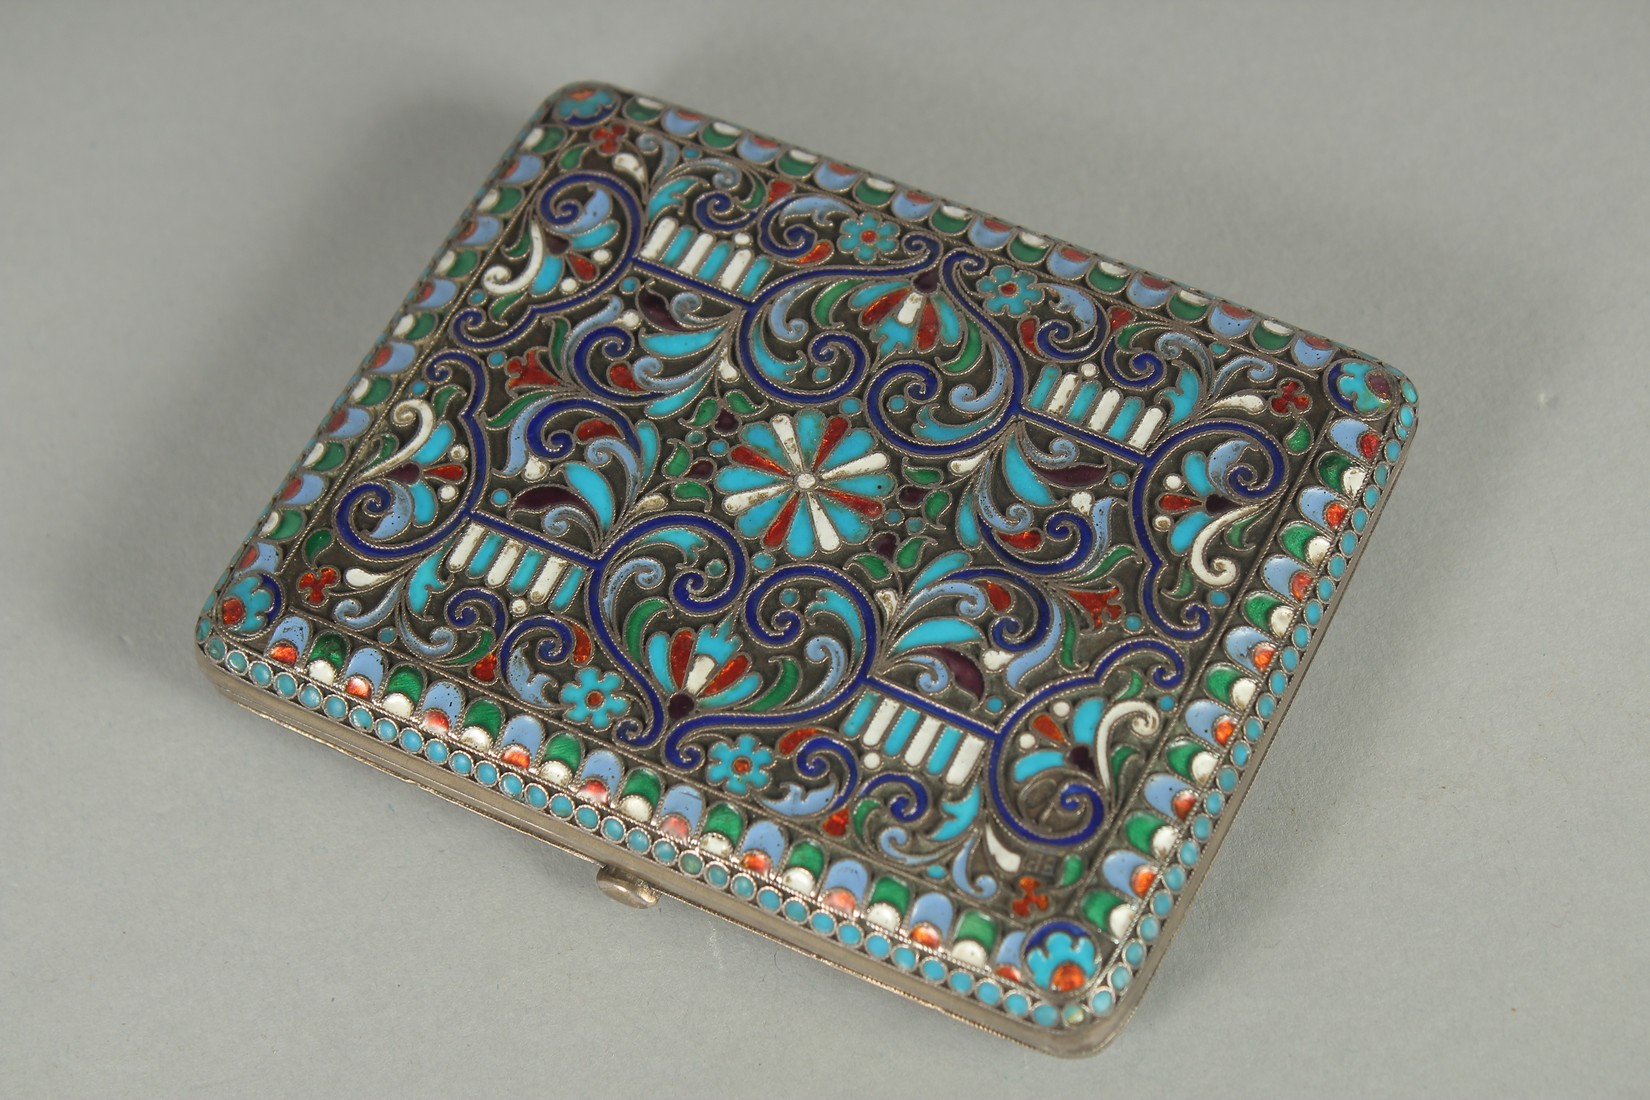 A RUSSIAN SILVER AND ENAMEL CIGARETTE CASE. 9.5cm x 7.5cm. Mark: head 87., B.P. Weight:105gms. - Image 2 of 4